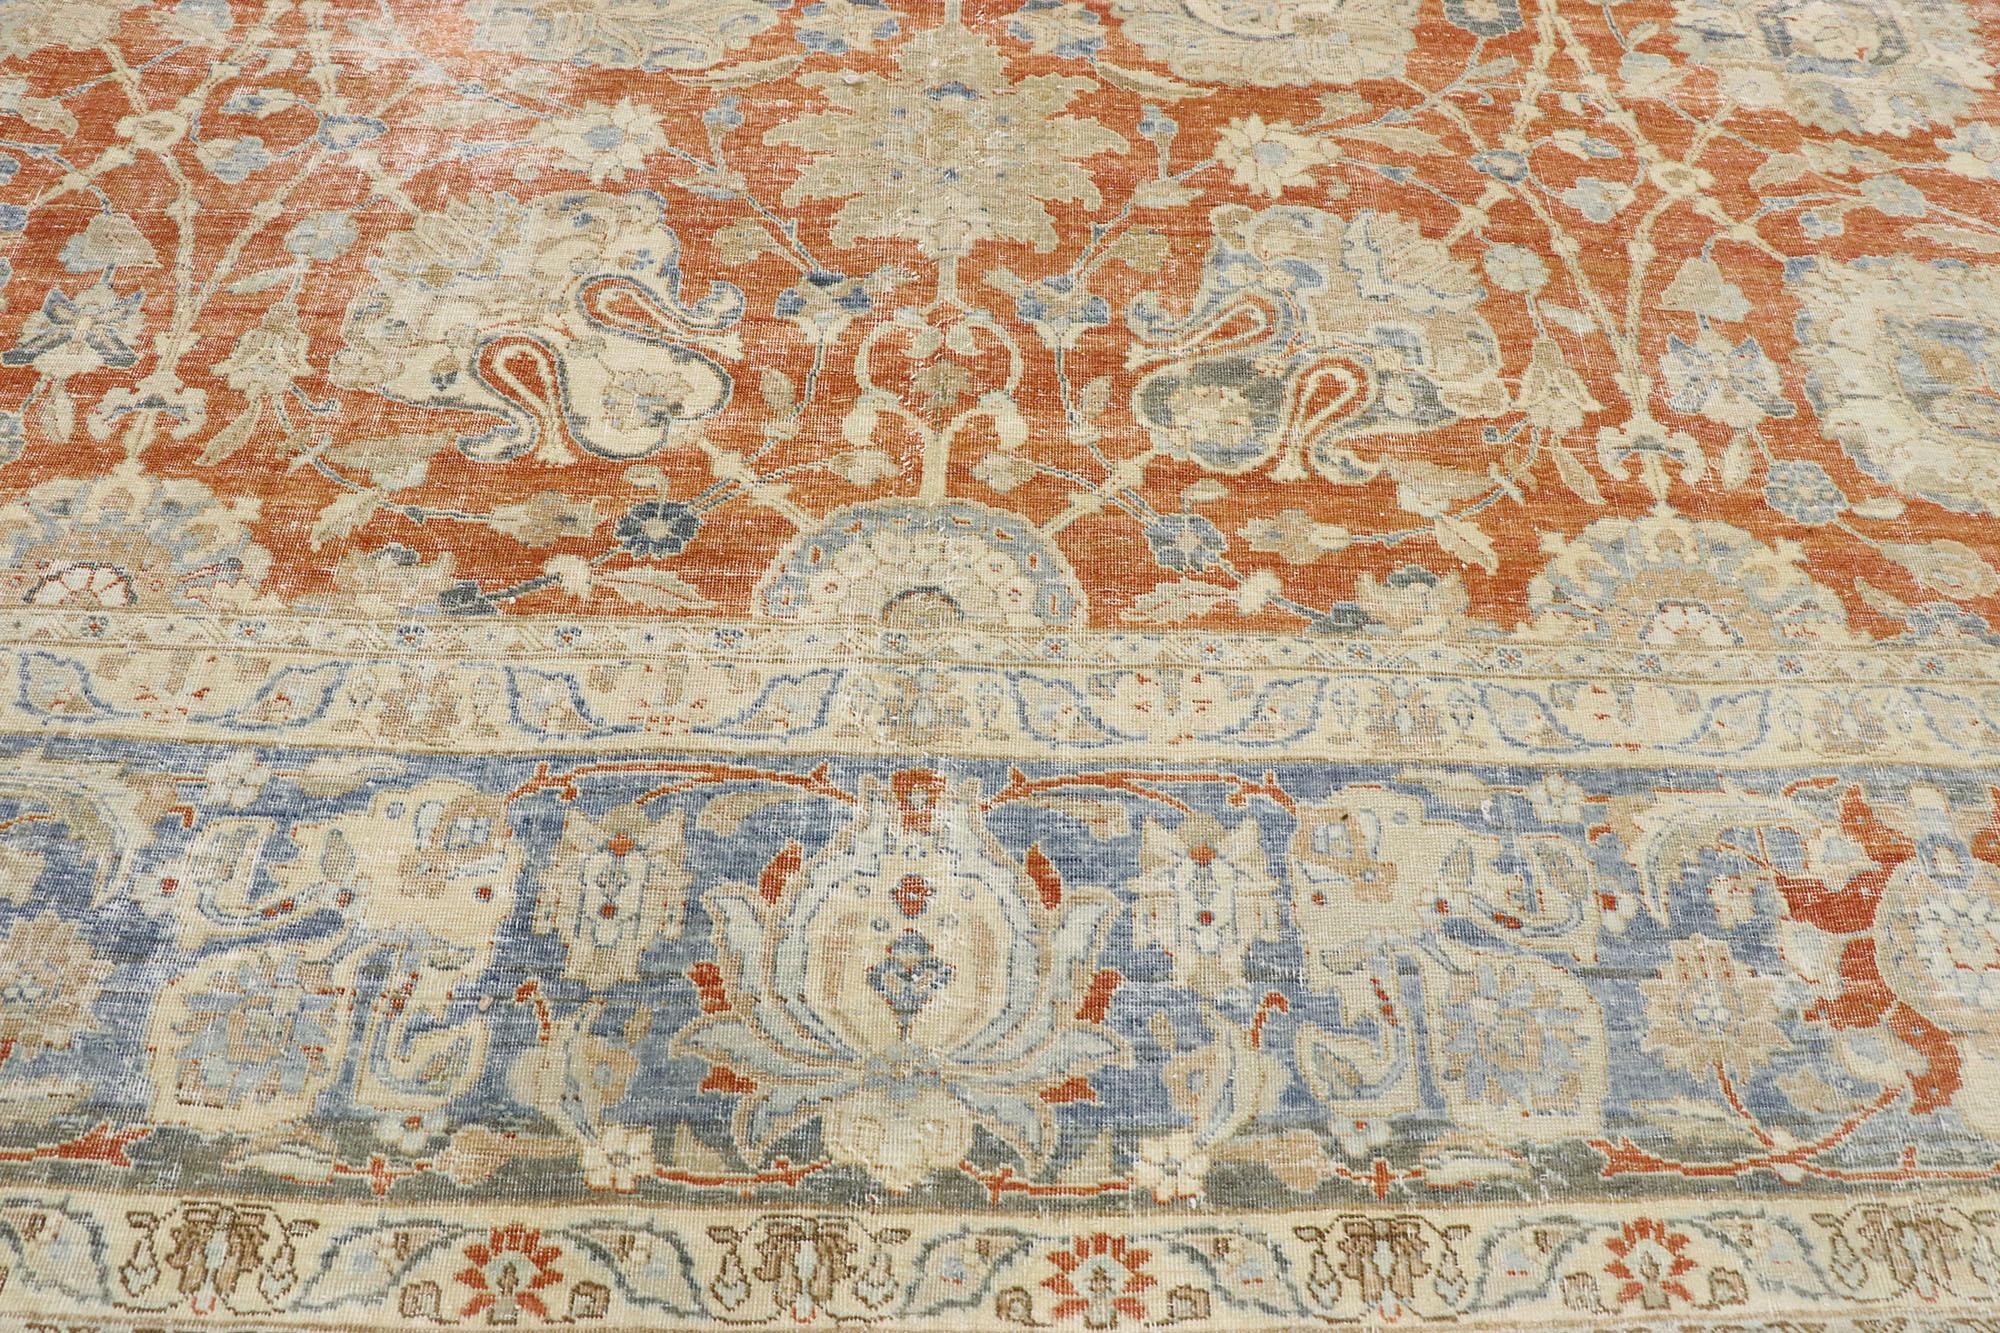 20th Century Distressed Antique Persian Tabriz Rug with Rustic Colonial Style